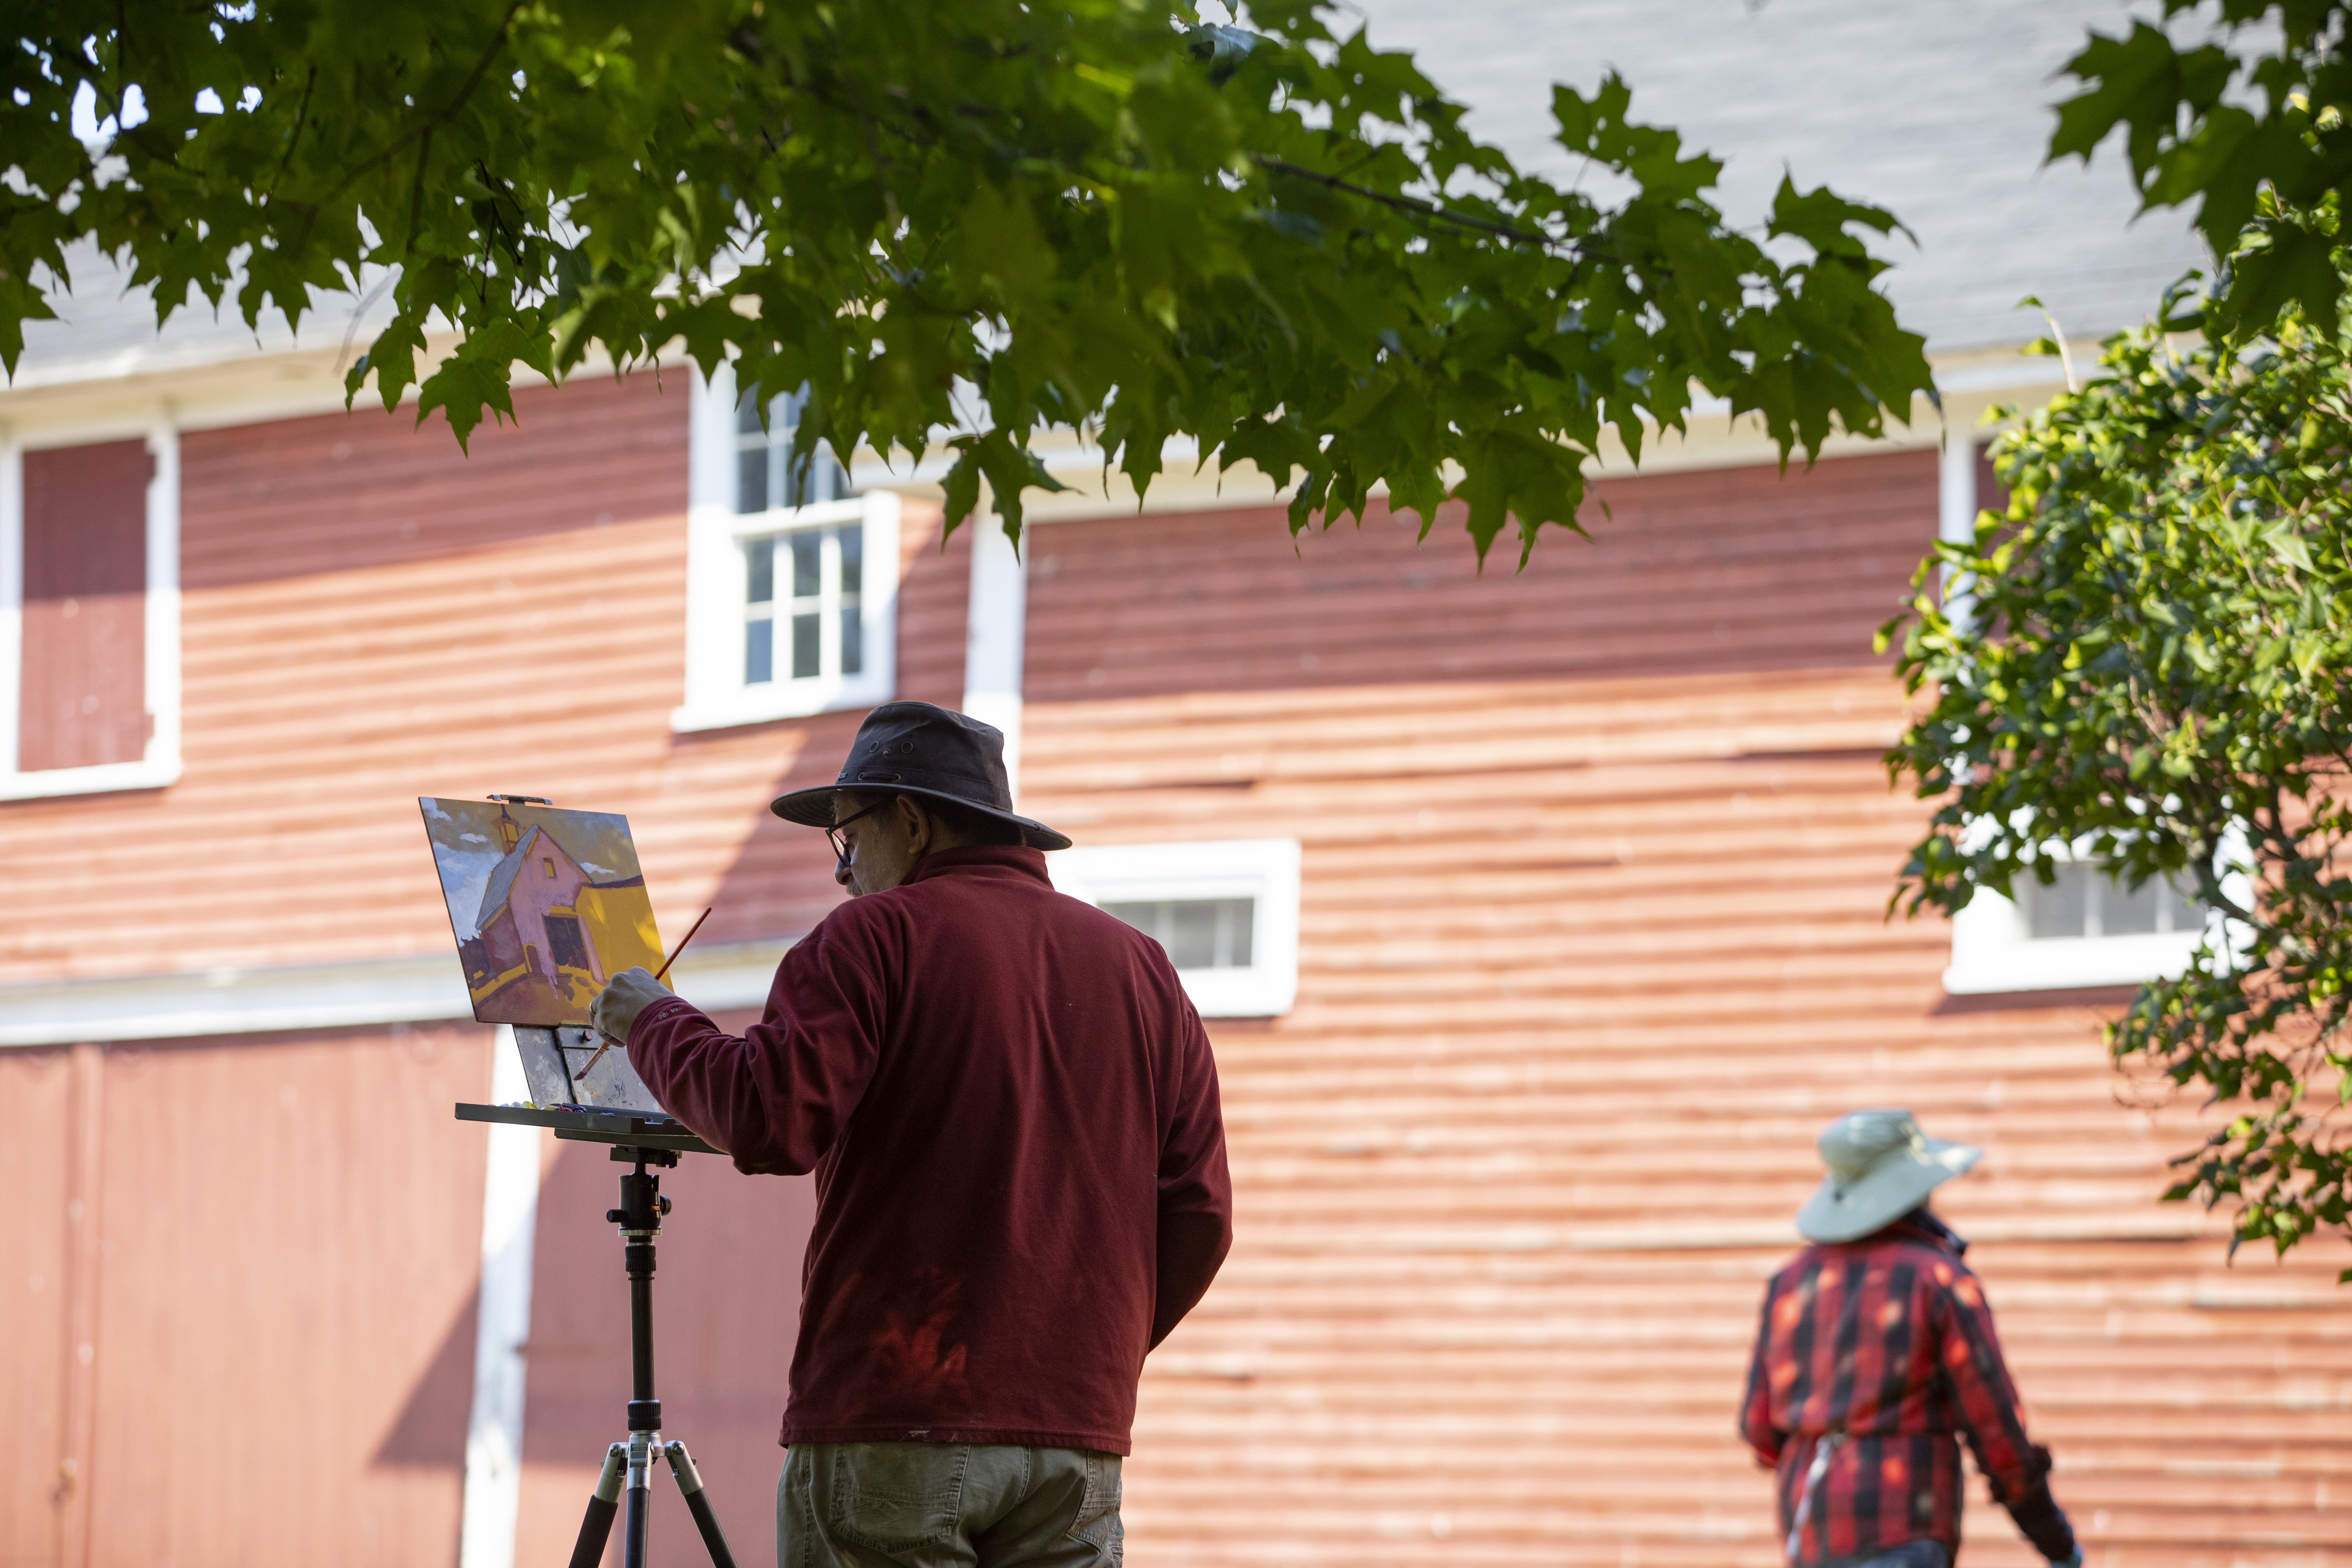 Jeff Pacione of Wenham paints during an outdoor painting class at Cogswell's Grant in Essex.